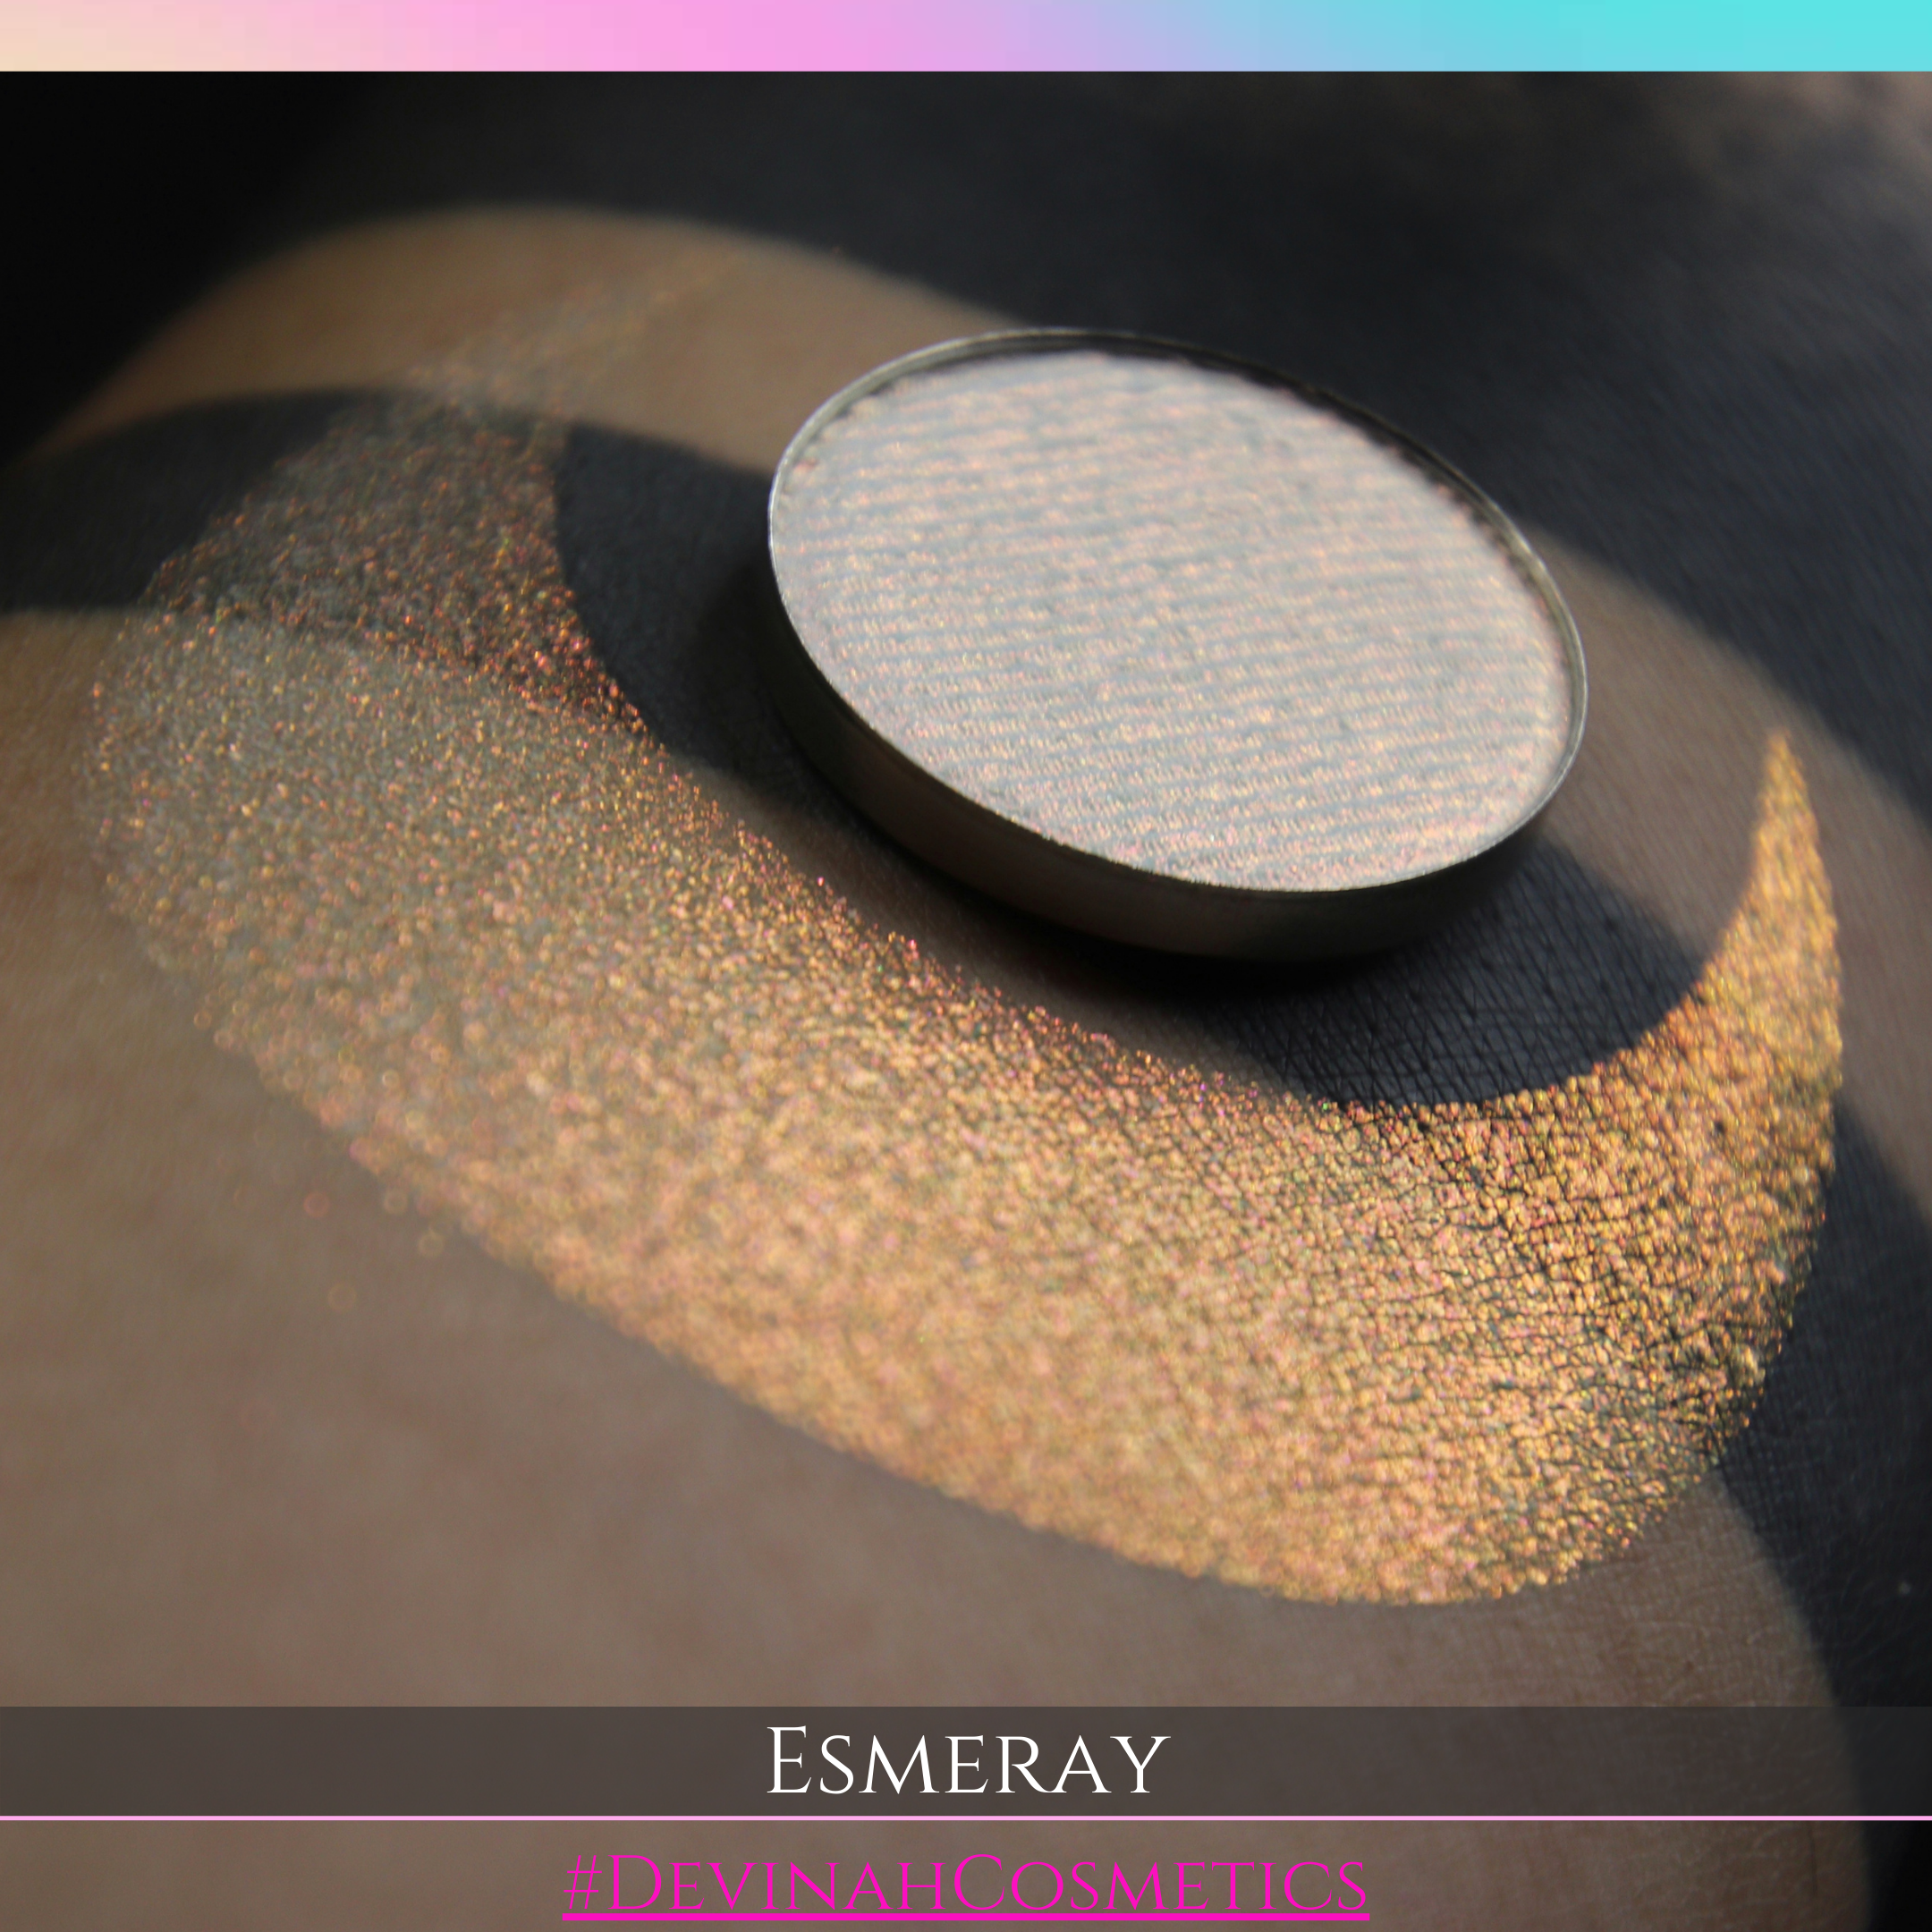 Esmeray dark moon  multichrome shifting with colors of red pink yellow and orange